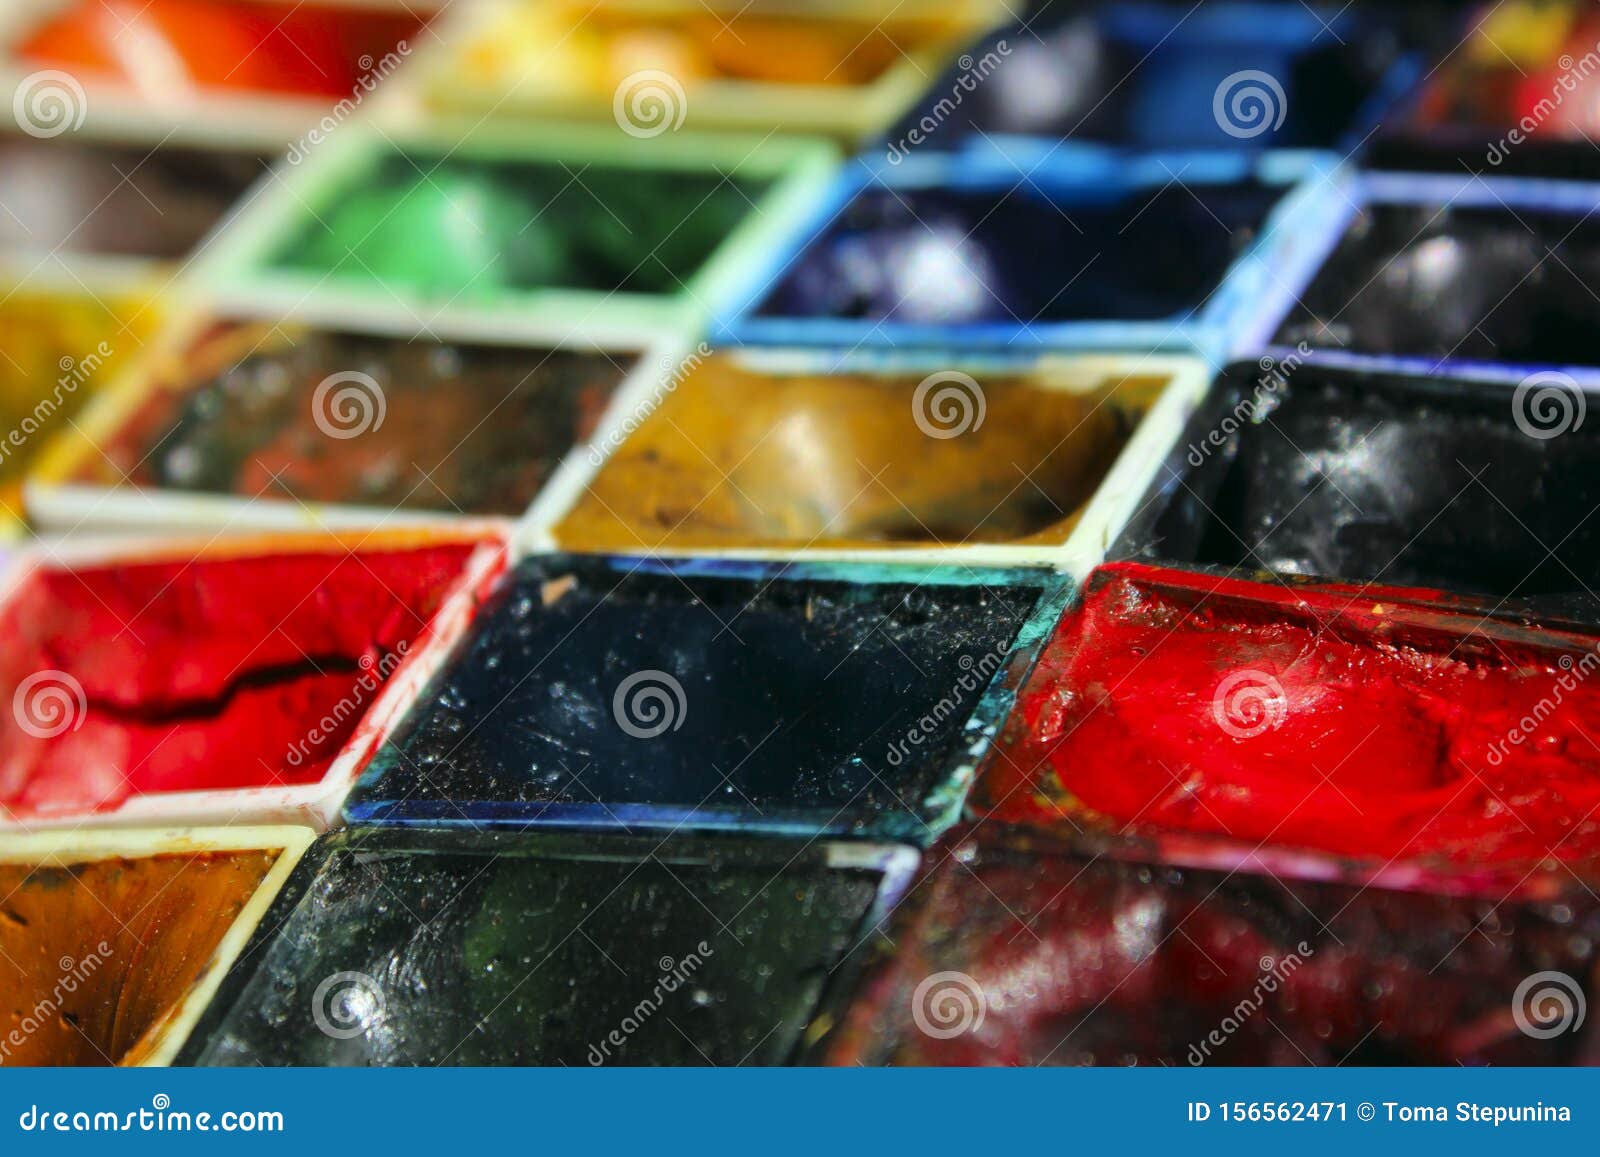 art materials, hobby concept. palette of colors, close up.